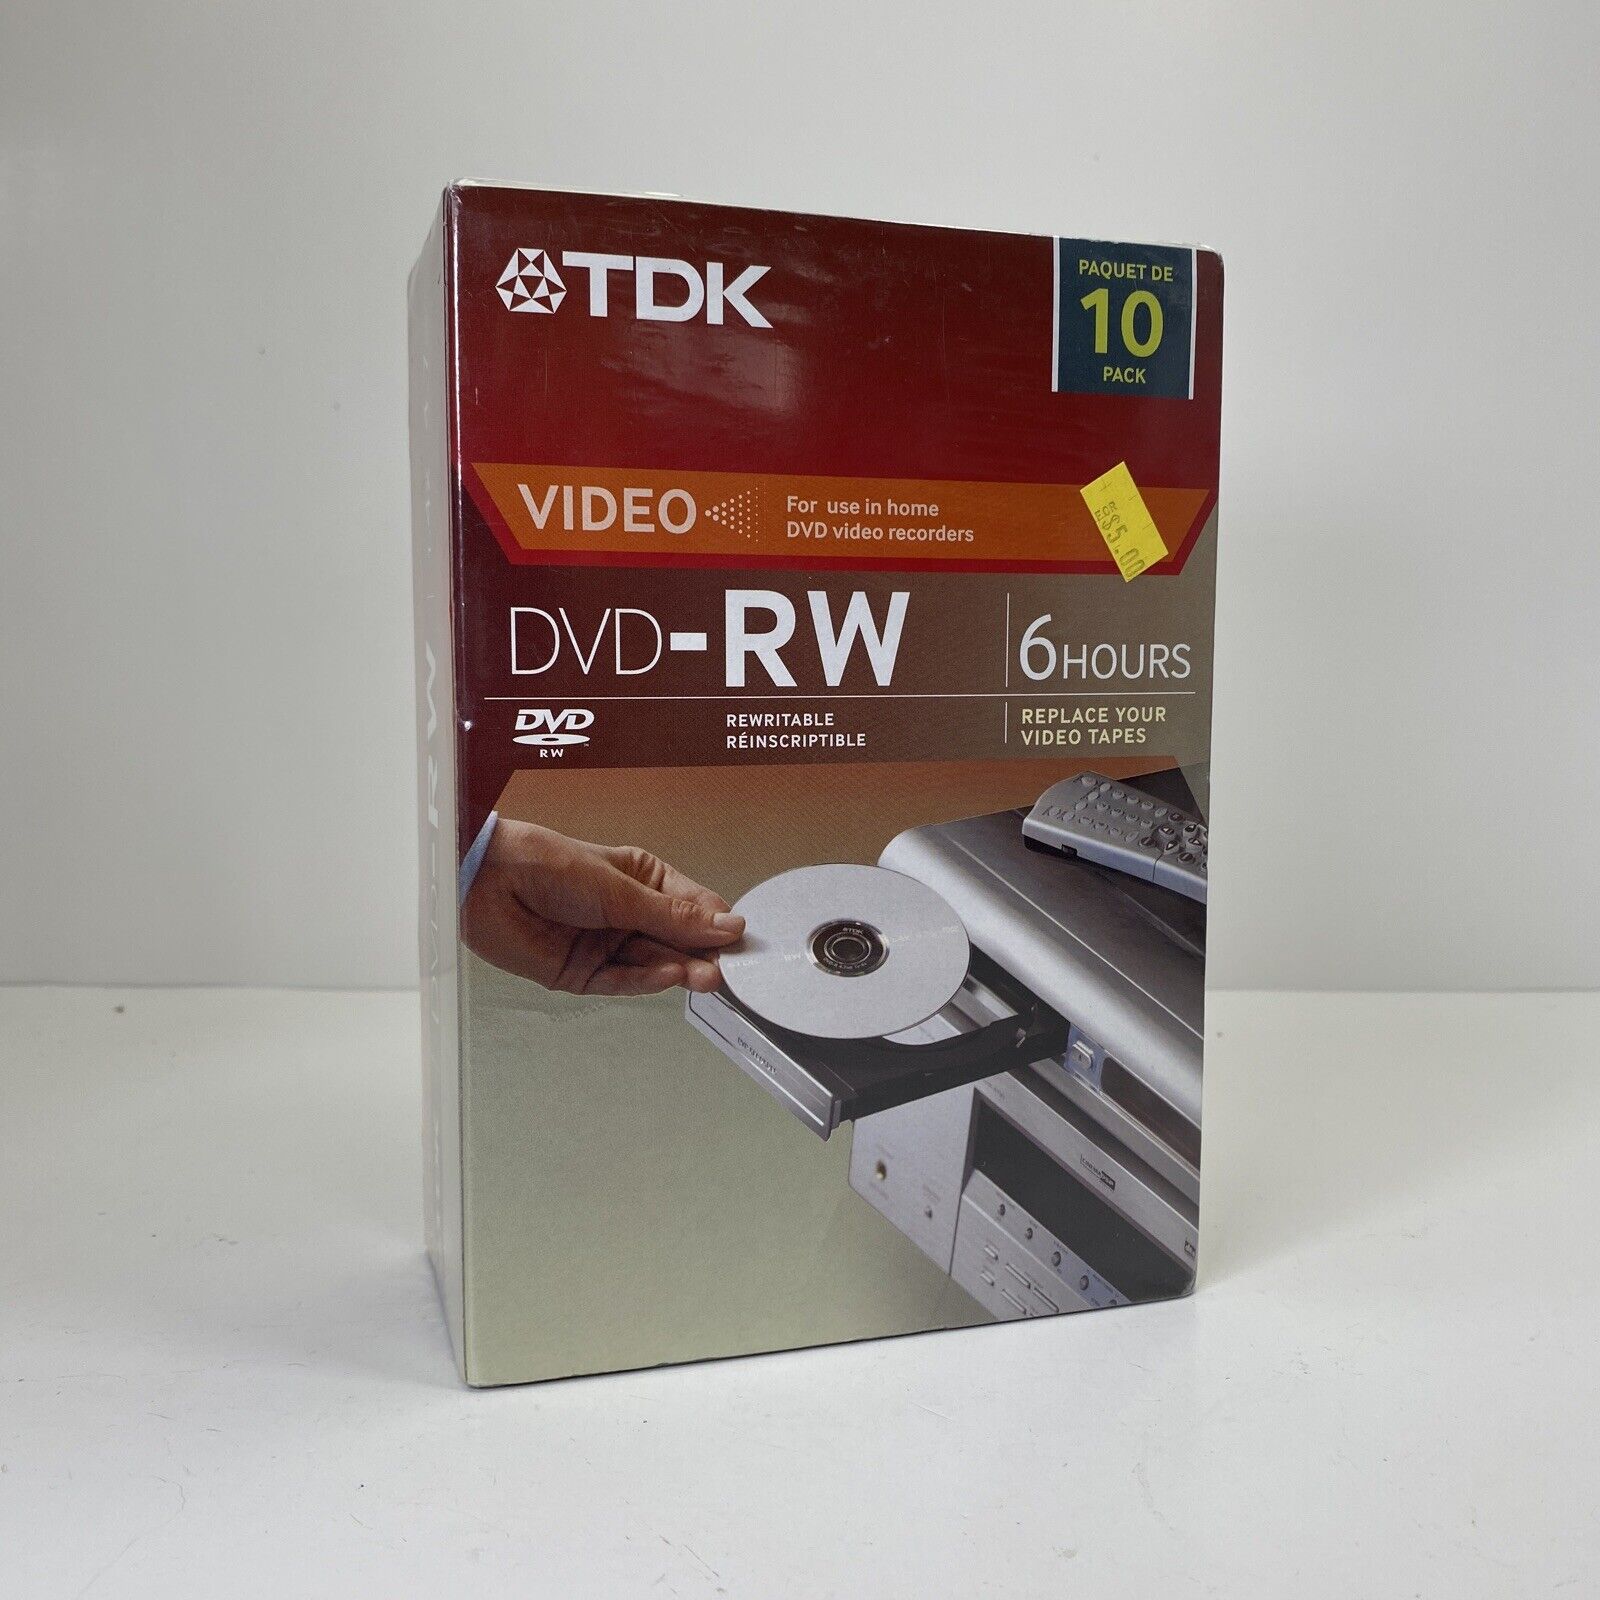 TDK DVD+RW 4x 4.7GB 9 Pack Rewriteable Blank DVDs - 6 Hours - Brand New